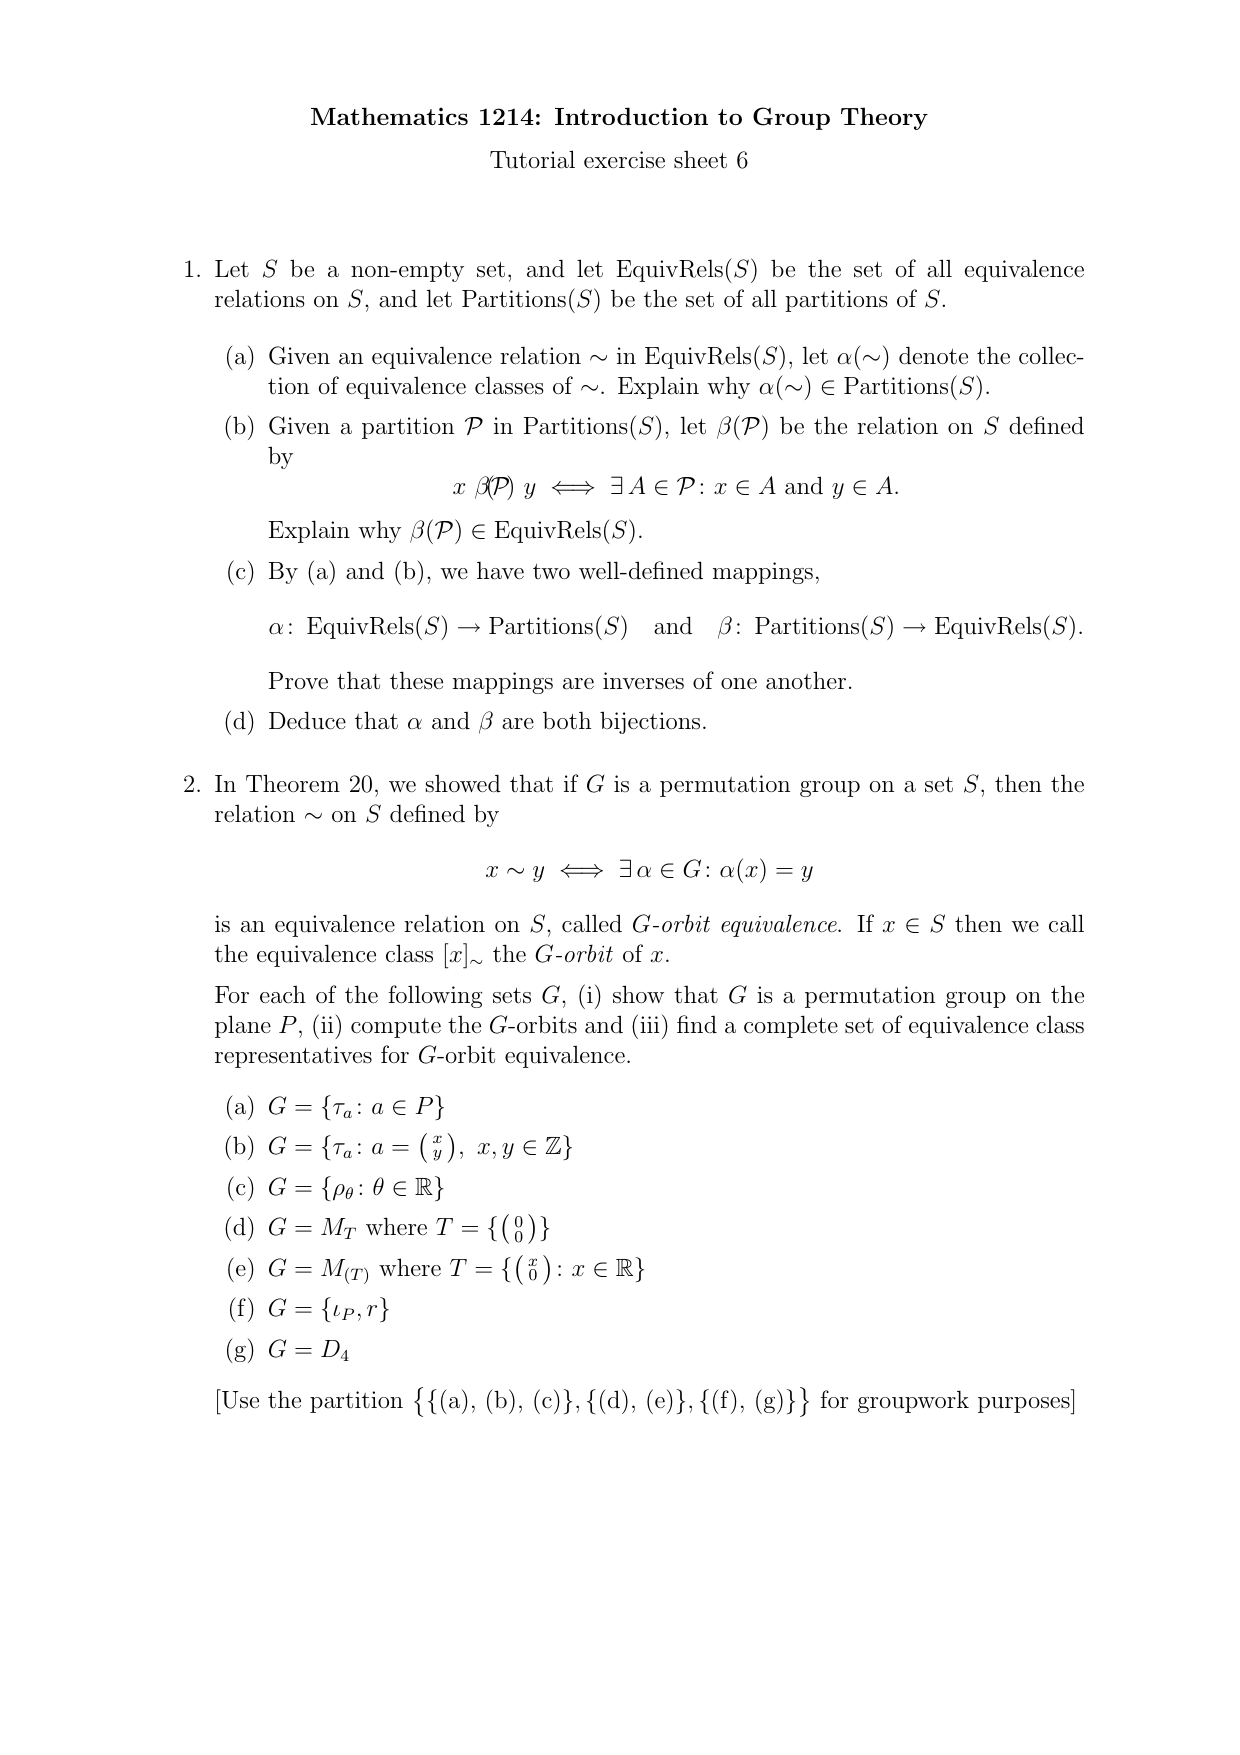 Mathematics 1214 Introduction To Group Theory Tutorial Exercise Sheet 6